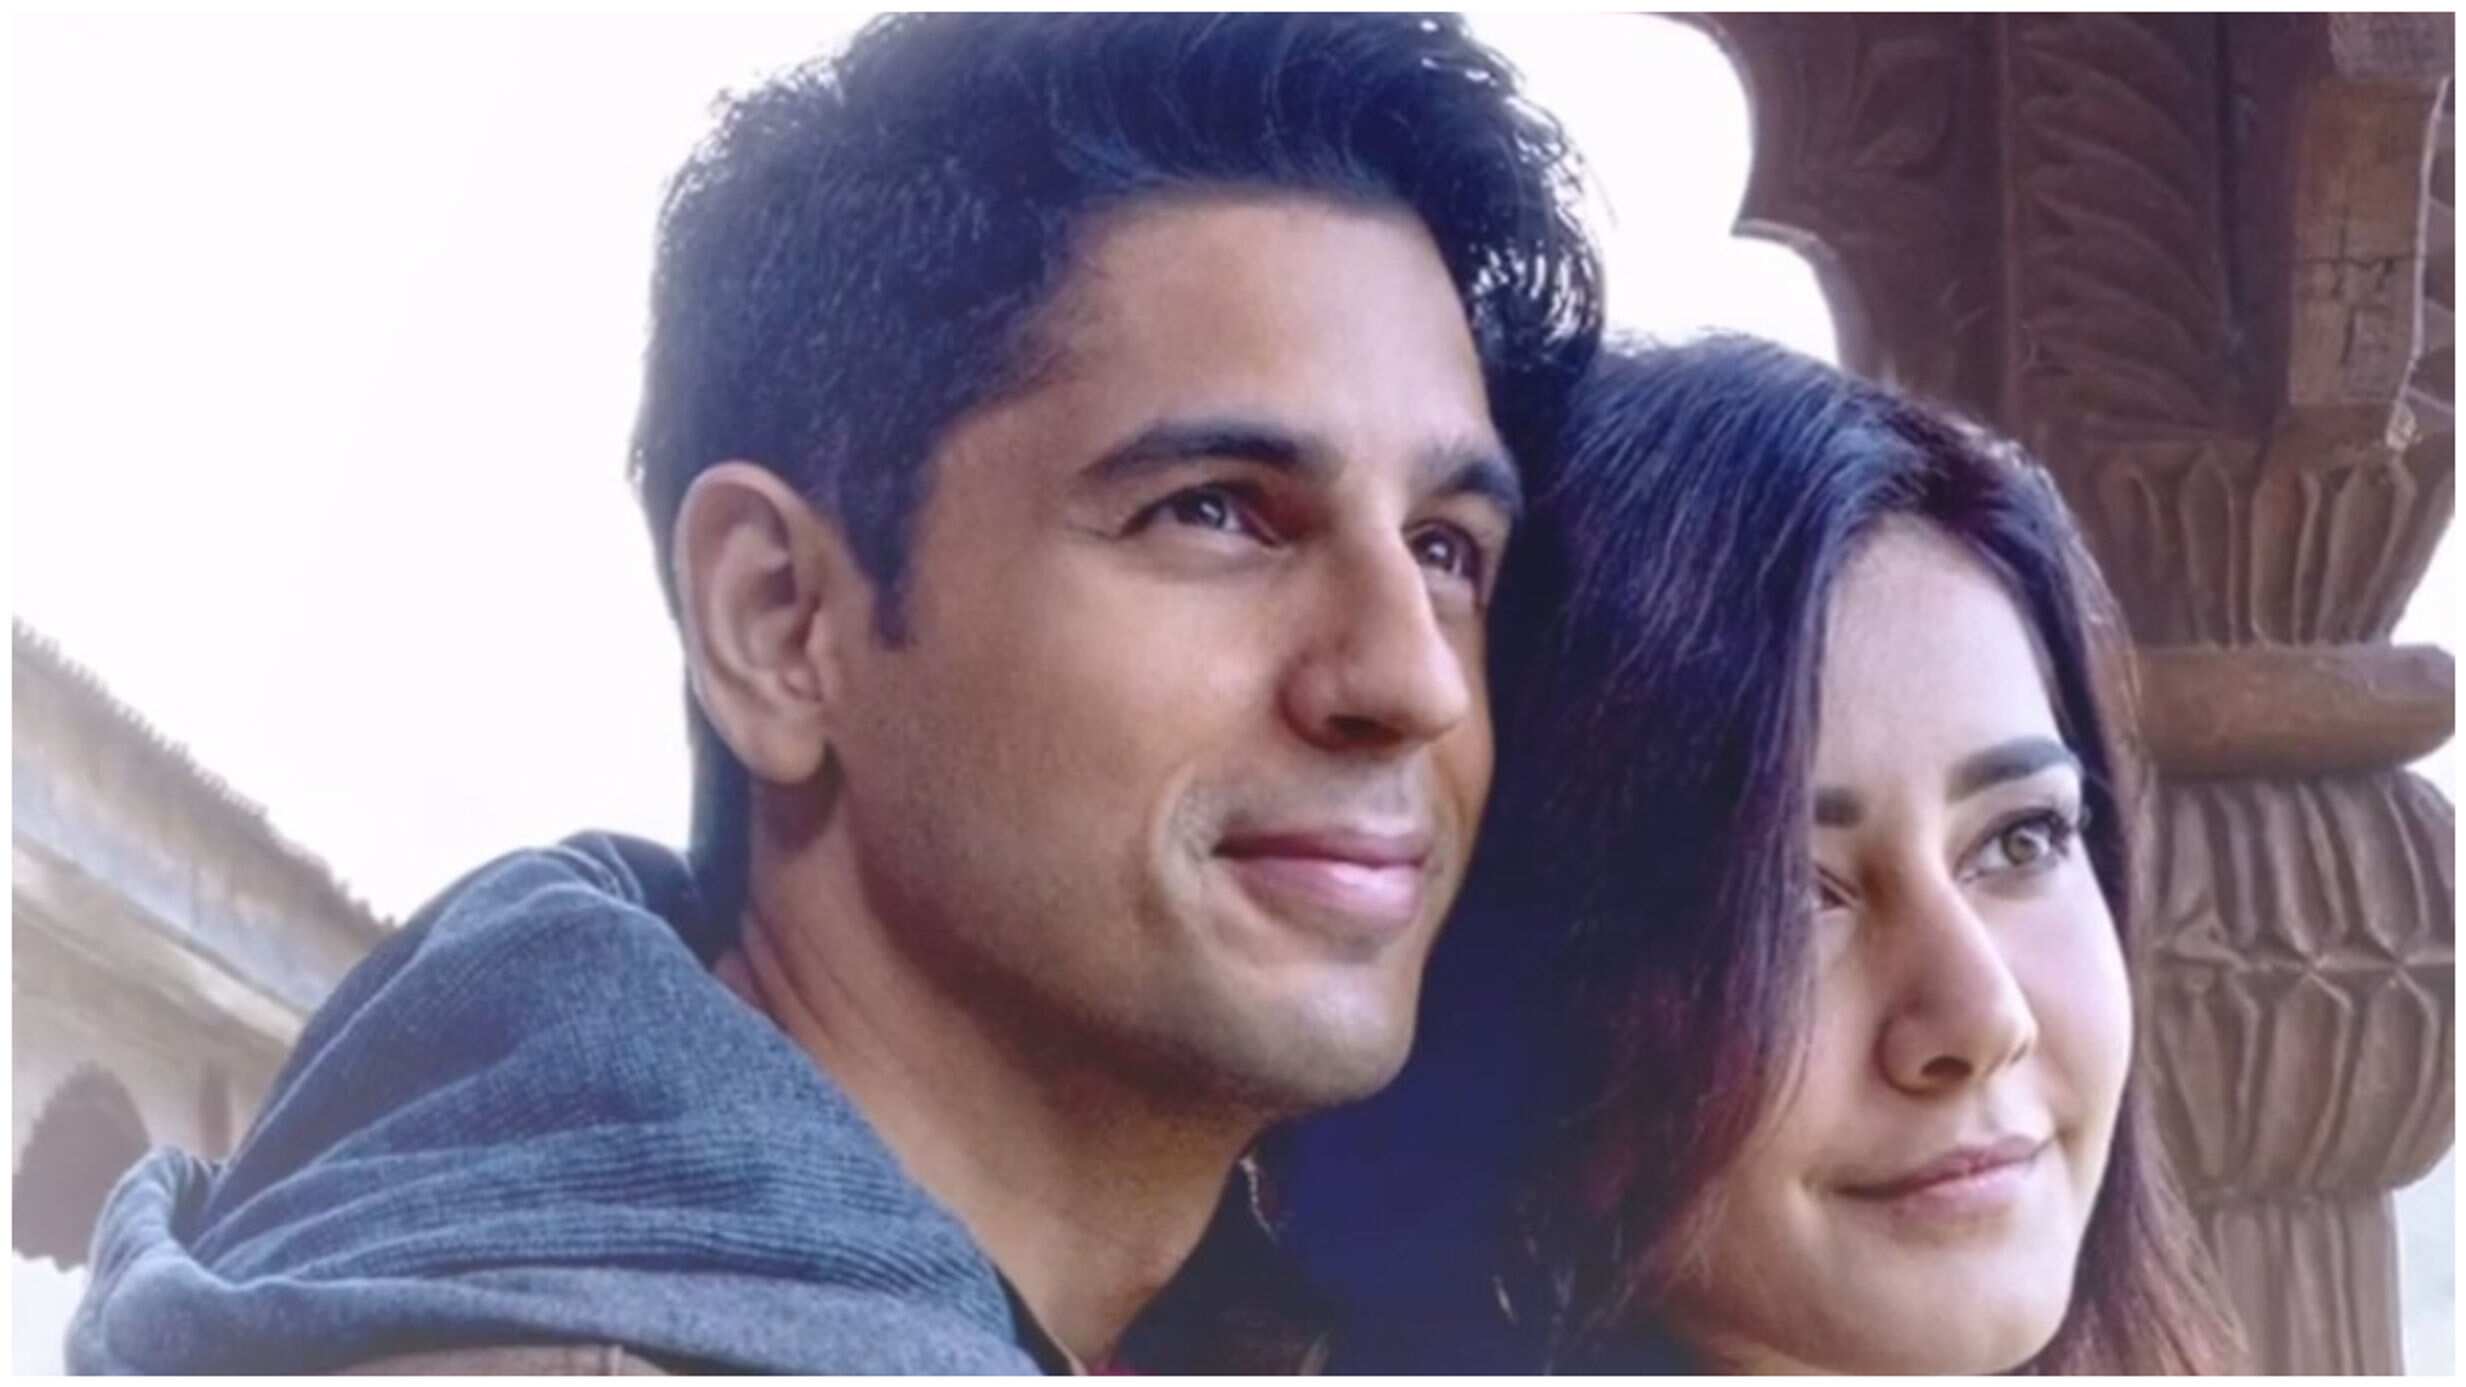 https://www.mobilemasala.com/music/Yodhas-romantic-song-Zindagi-Tere-Naam-teaser-Sidharth-Malhotra-Raashii-Khanna-starrer-song-to-be-out-in-2-days-i217411